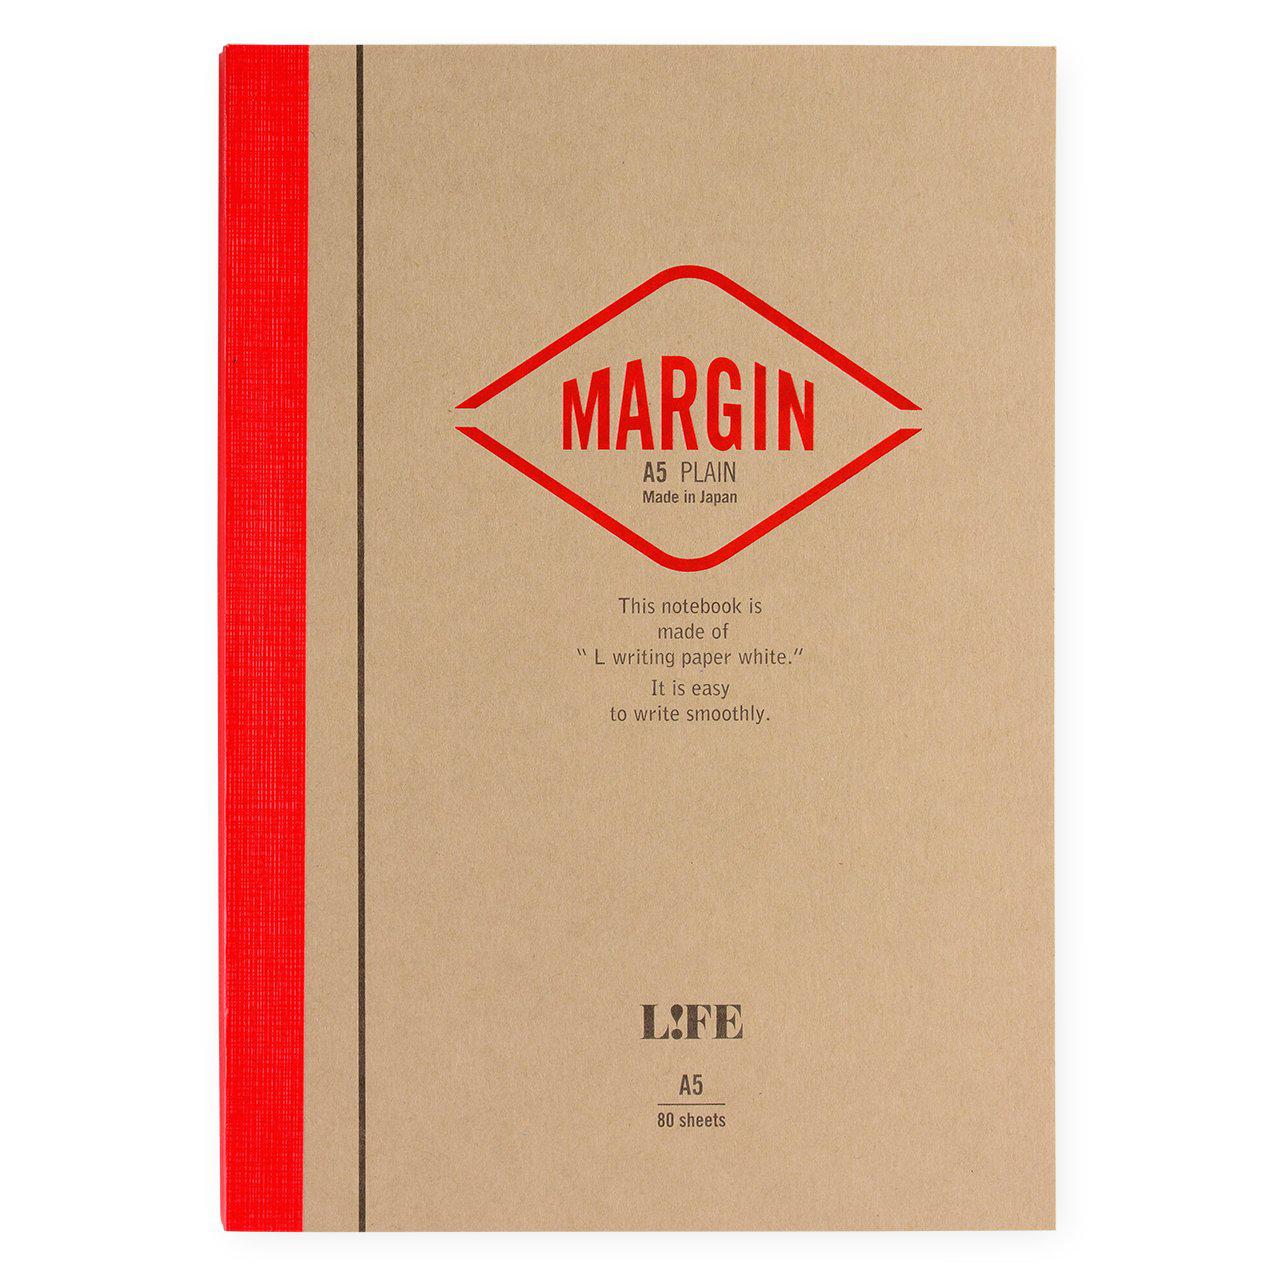 Margin A5 or B5 Notebook | Plain, Section or Ruled